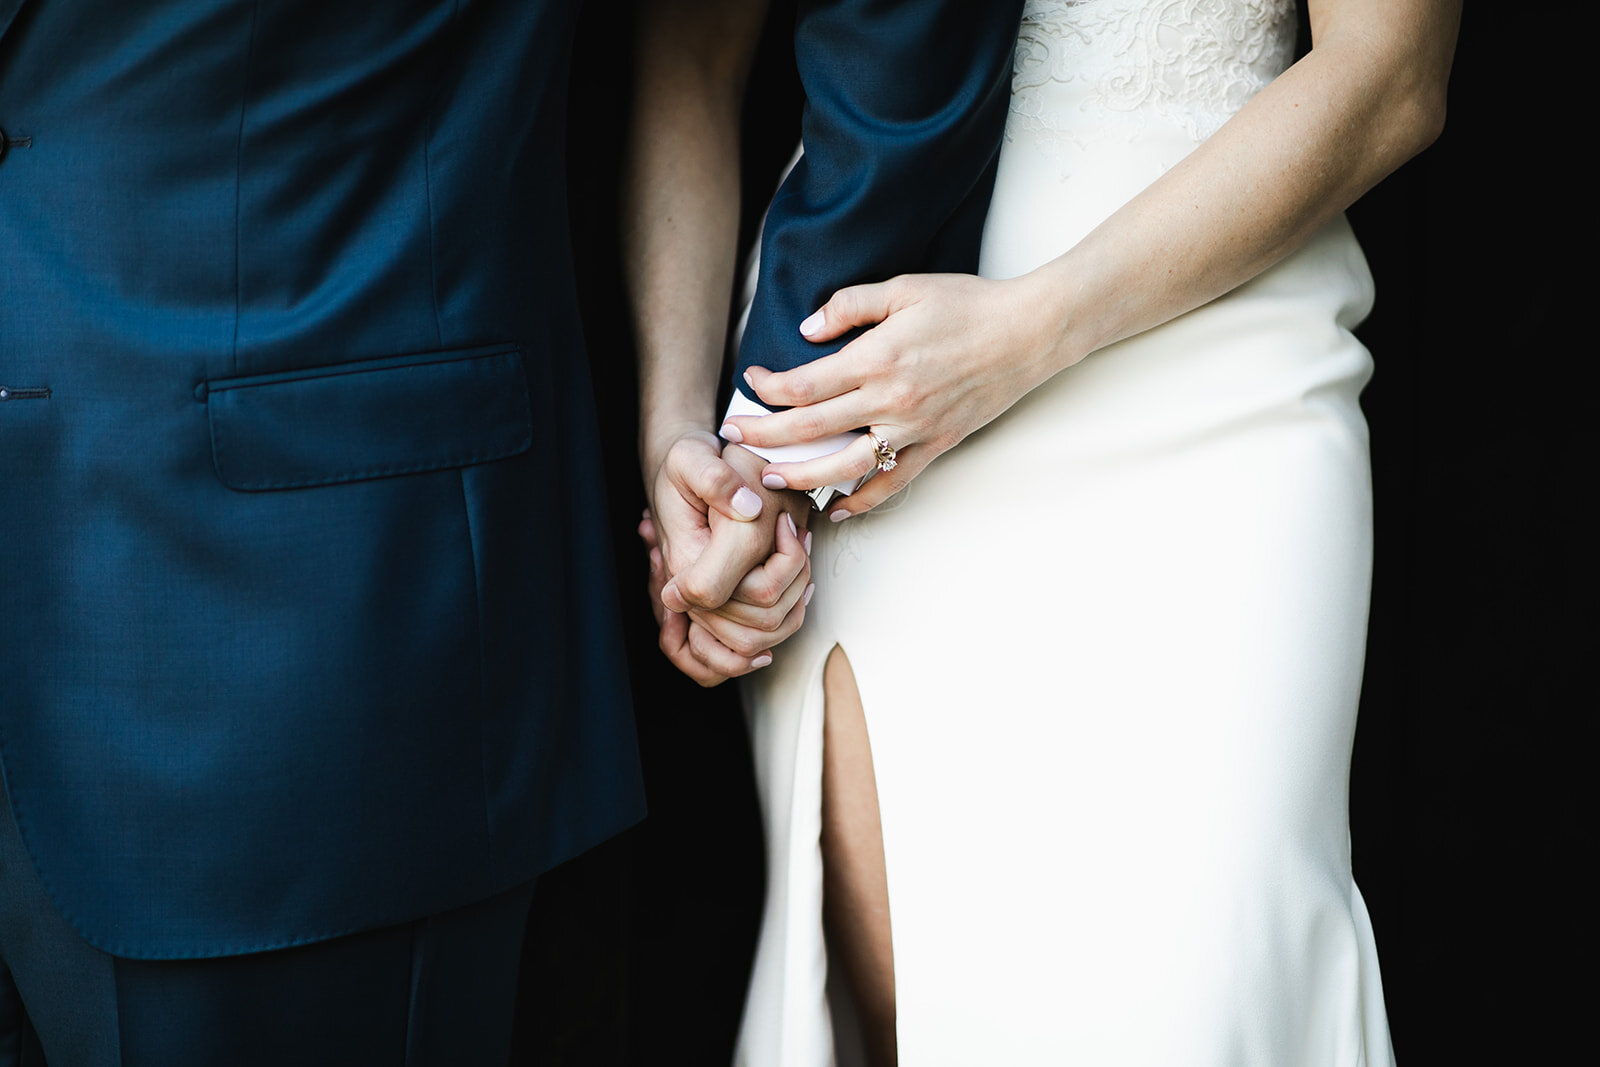  bride and groom holding hands portrait 